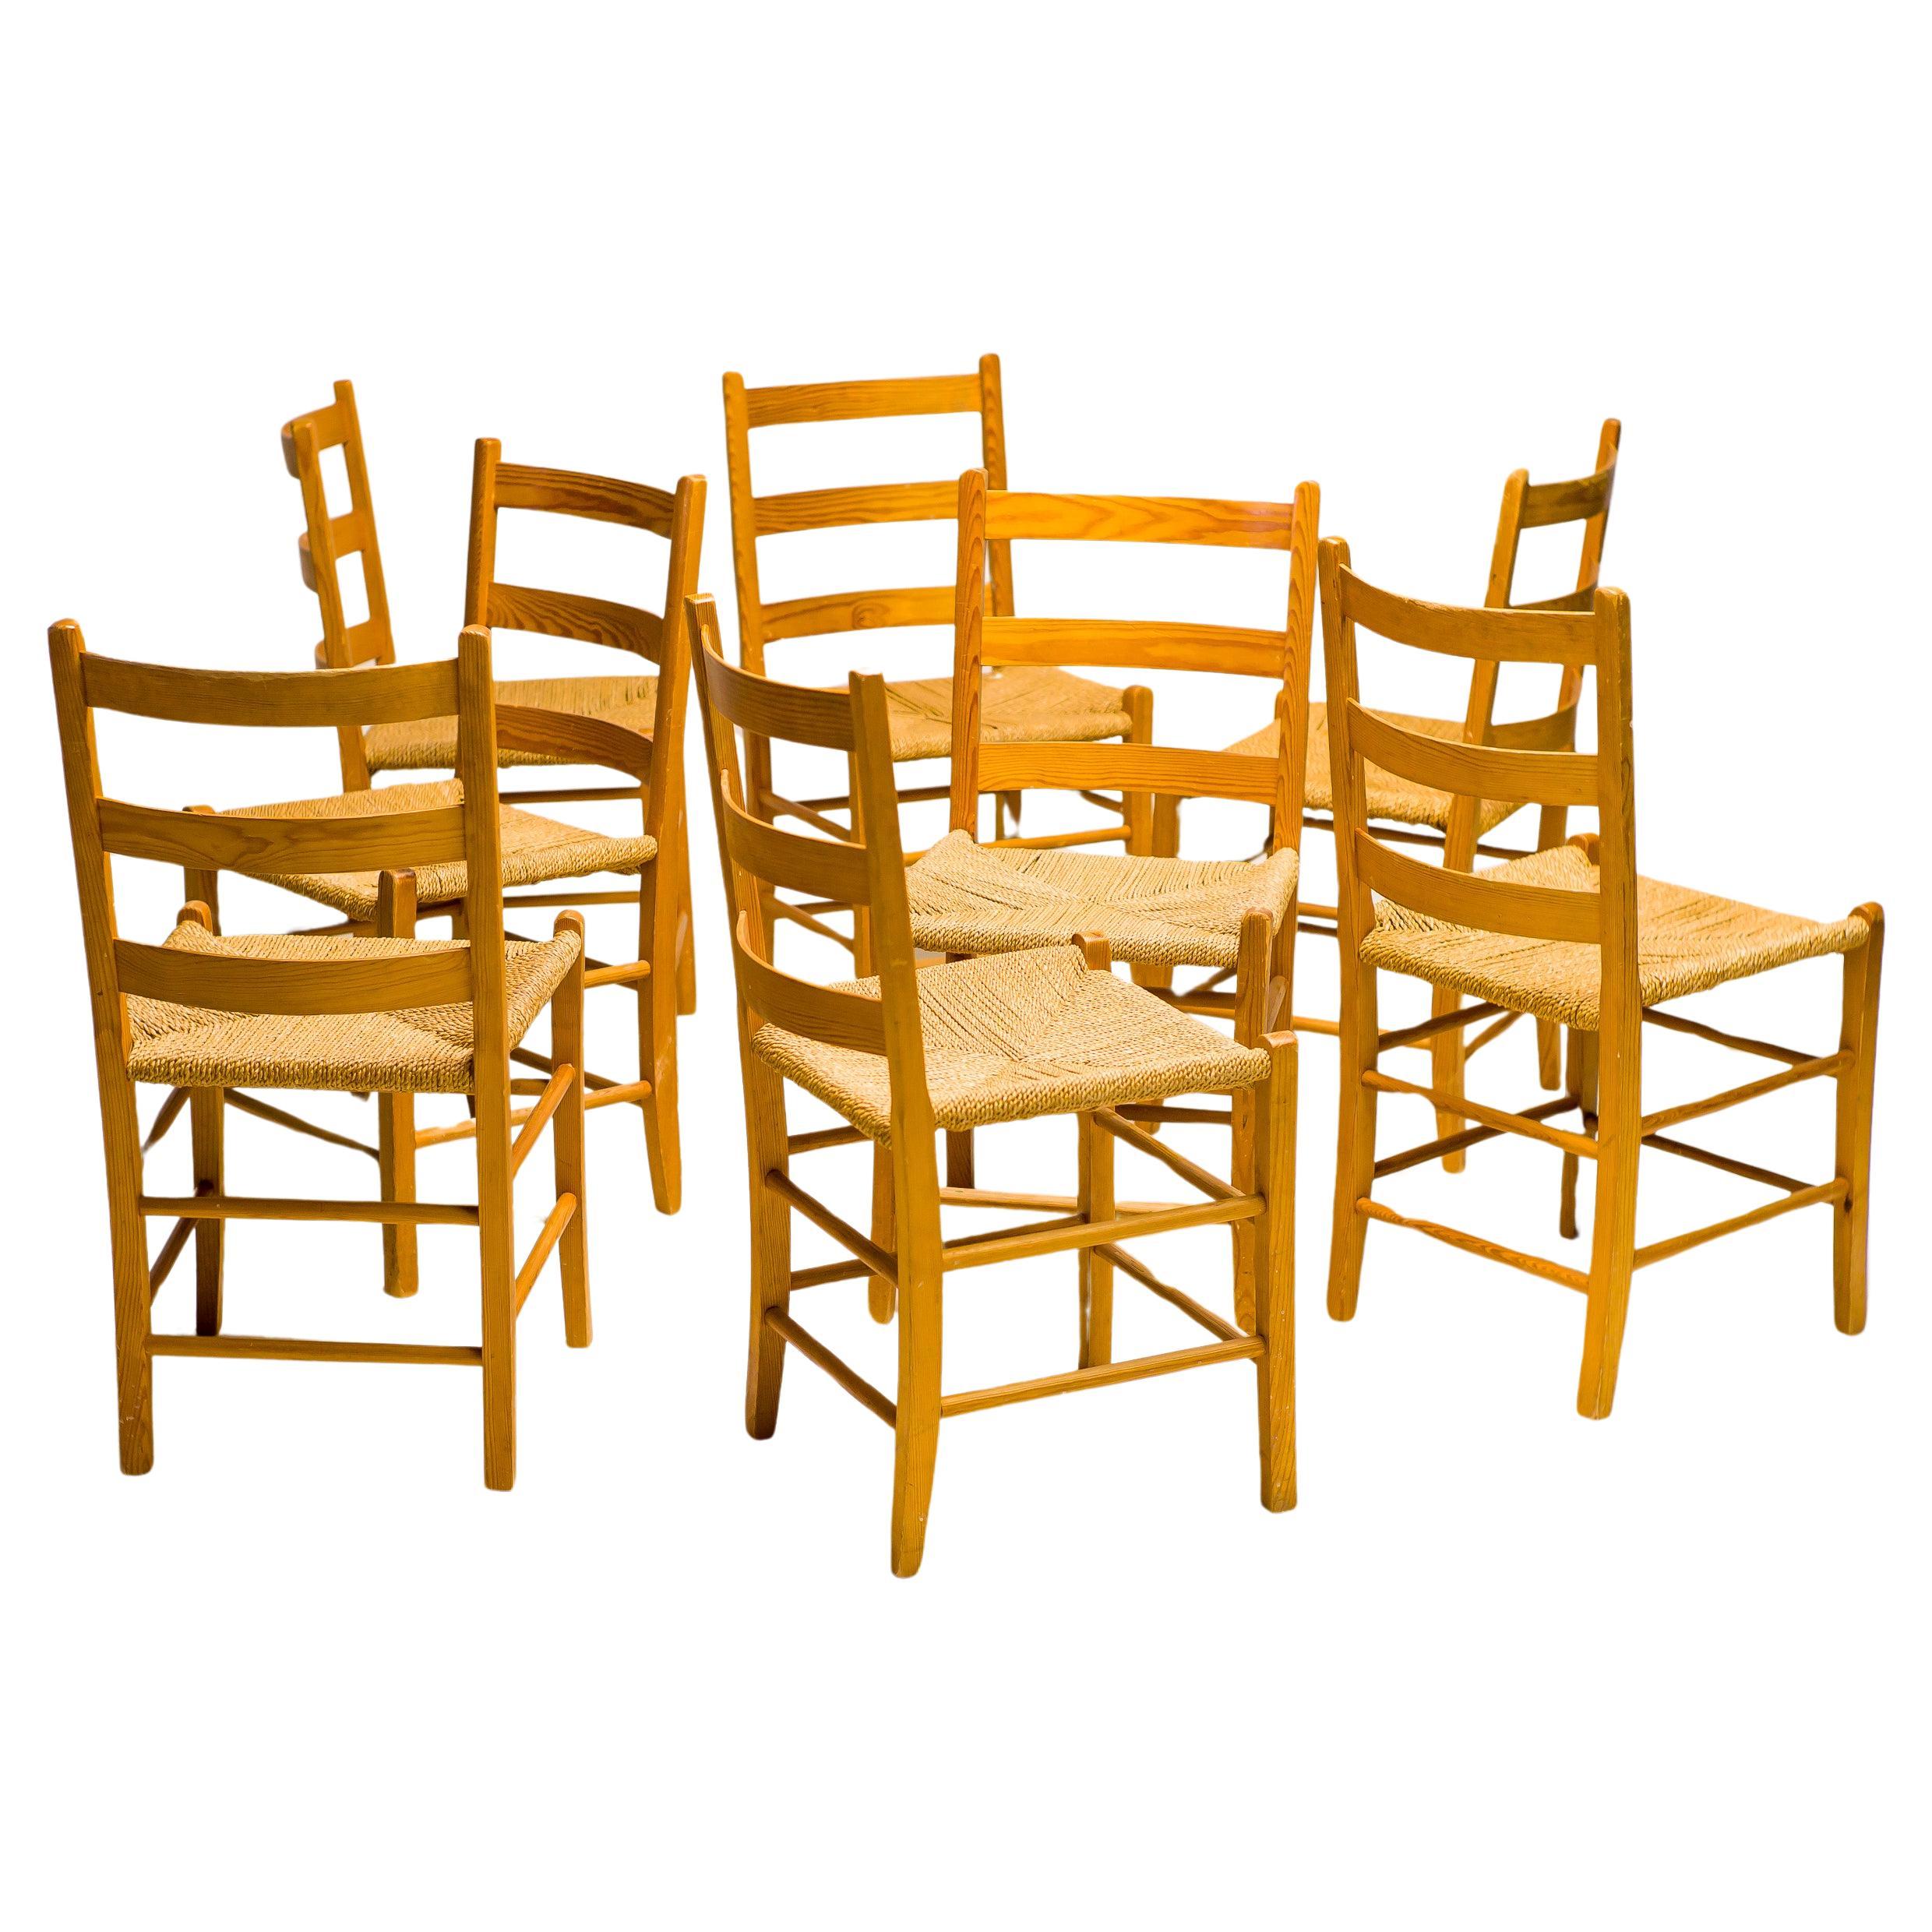 Set of Eight Oregon Pine Ladder Chairs